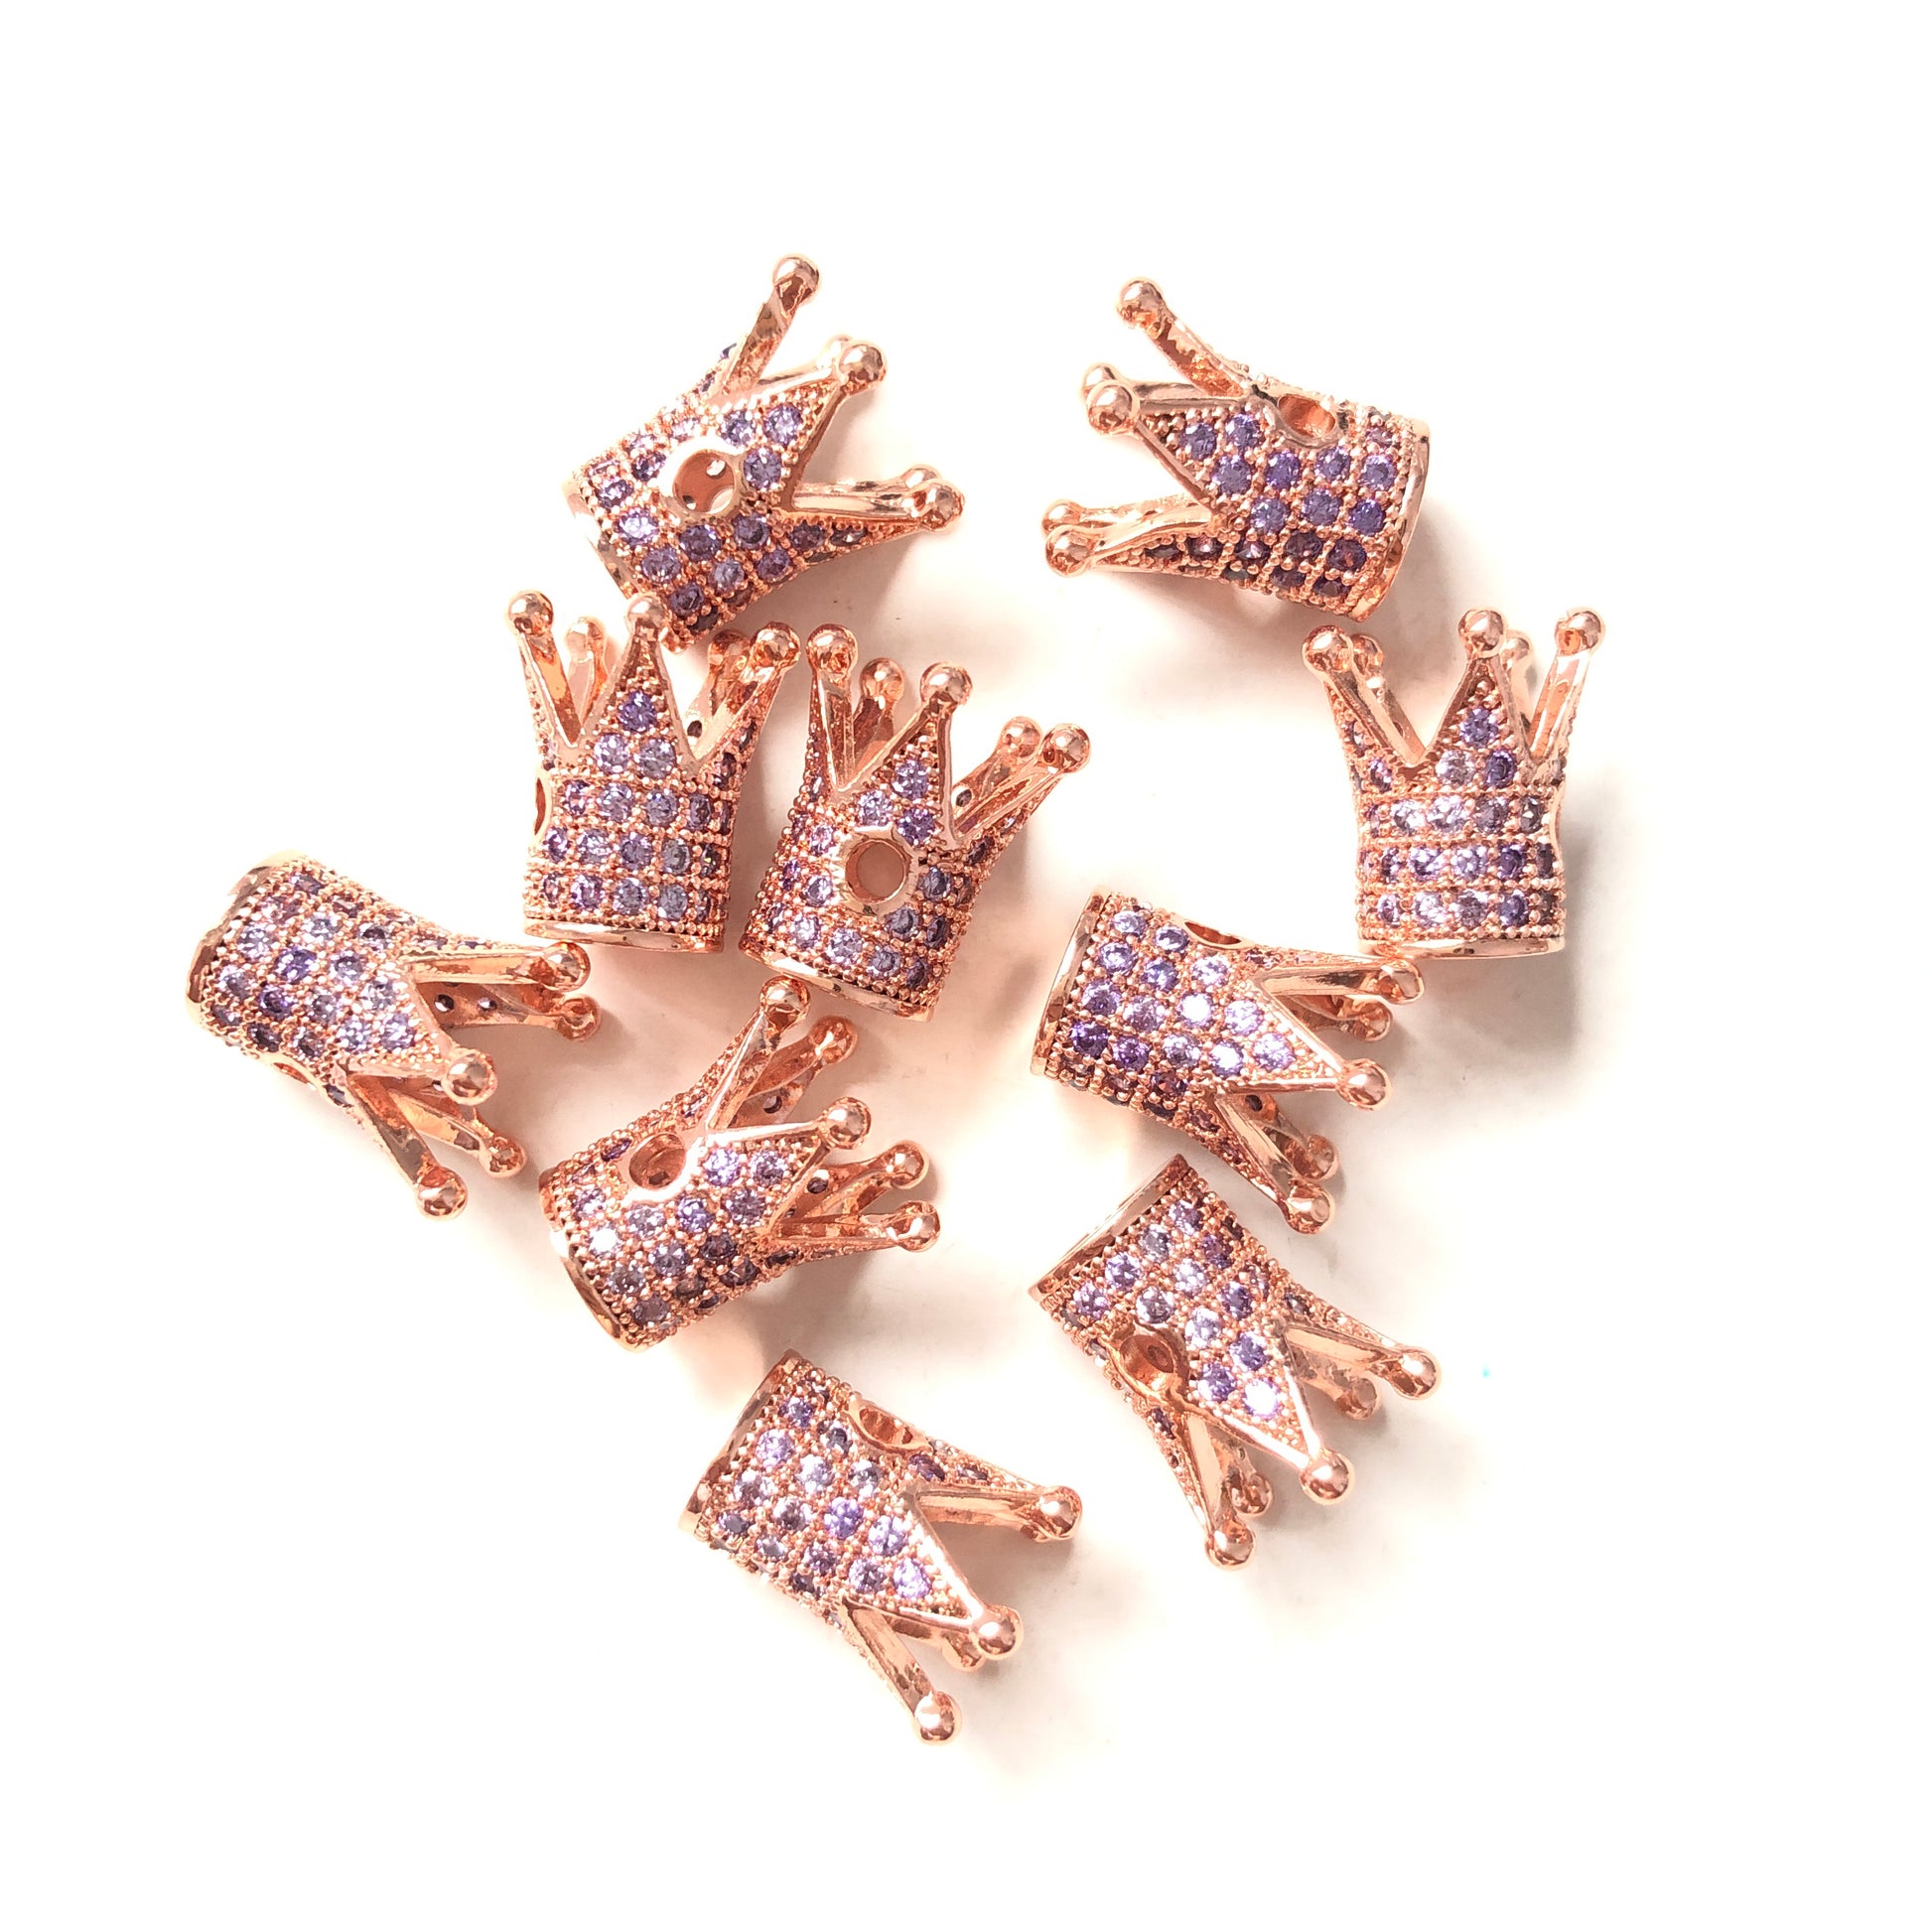 10pcs/lot Purple CZ Paved Crown Spacers Rose Gold CZ Paved Spacers Colorful Zirconia Crown Beads Charms Beads Beyond